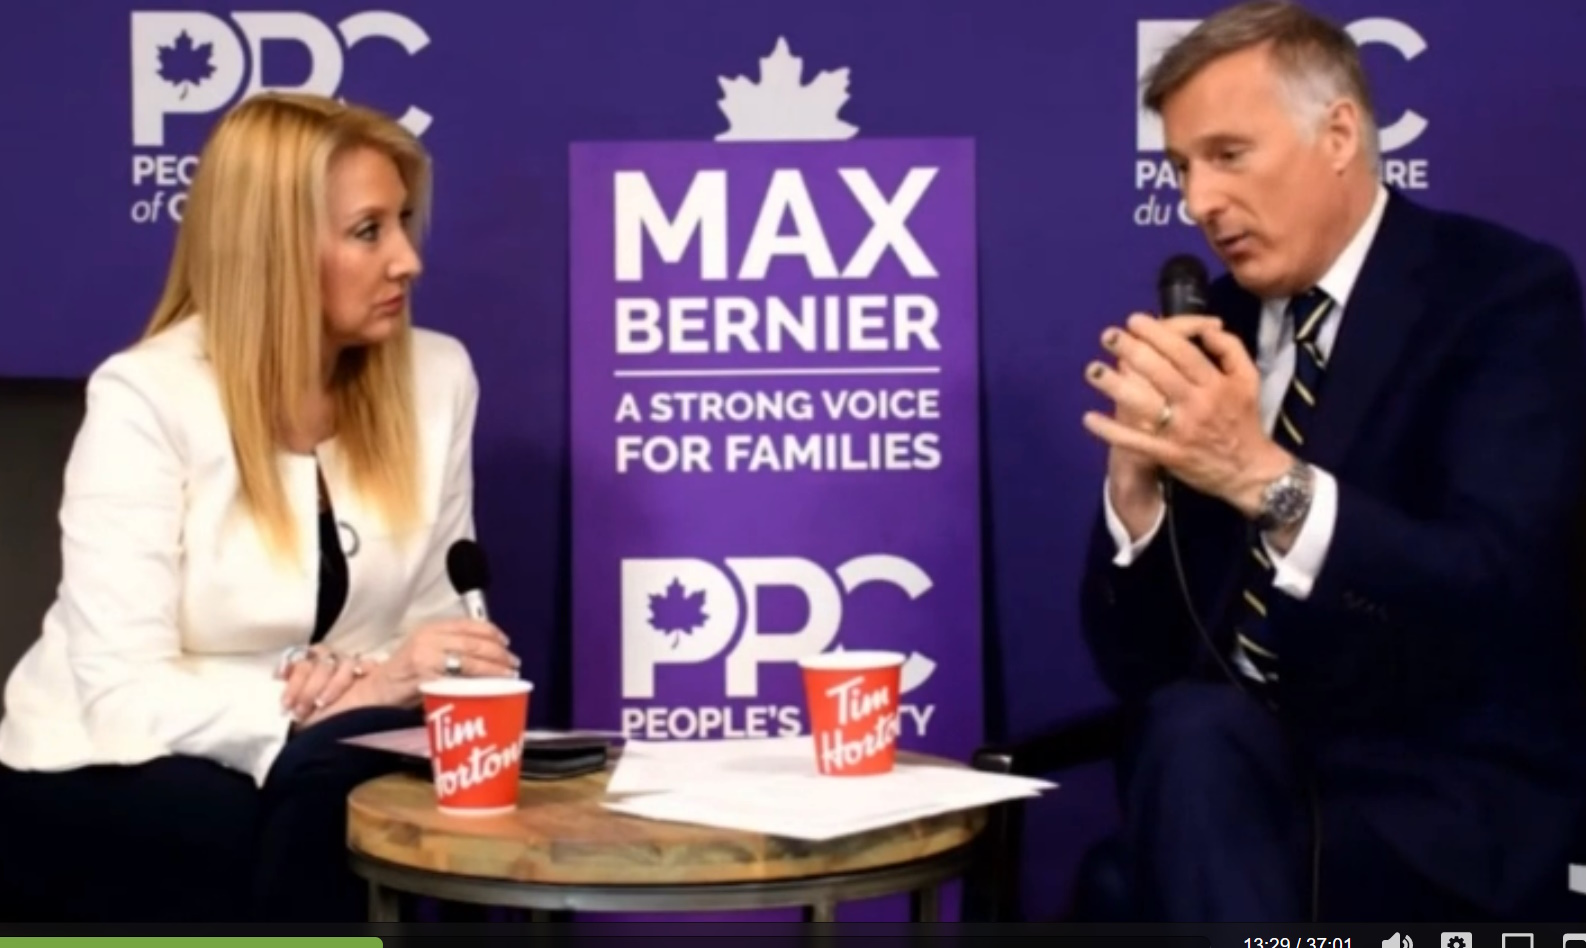 Vote Maxime Bernier The Peoples Party of Canada. Only Max will save Canada from communist and socialists! Make Canada Great Again! Vote Max!